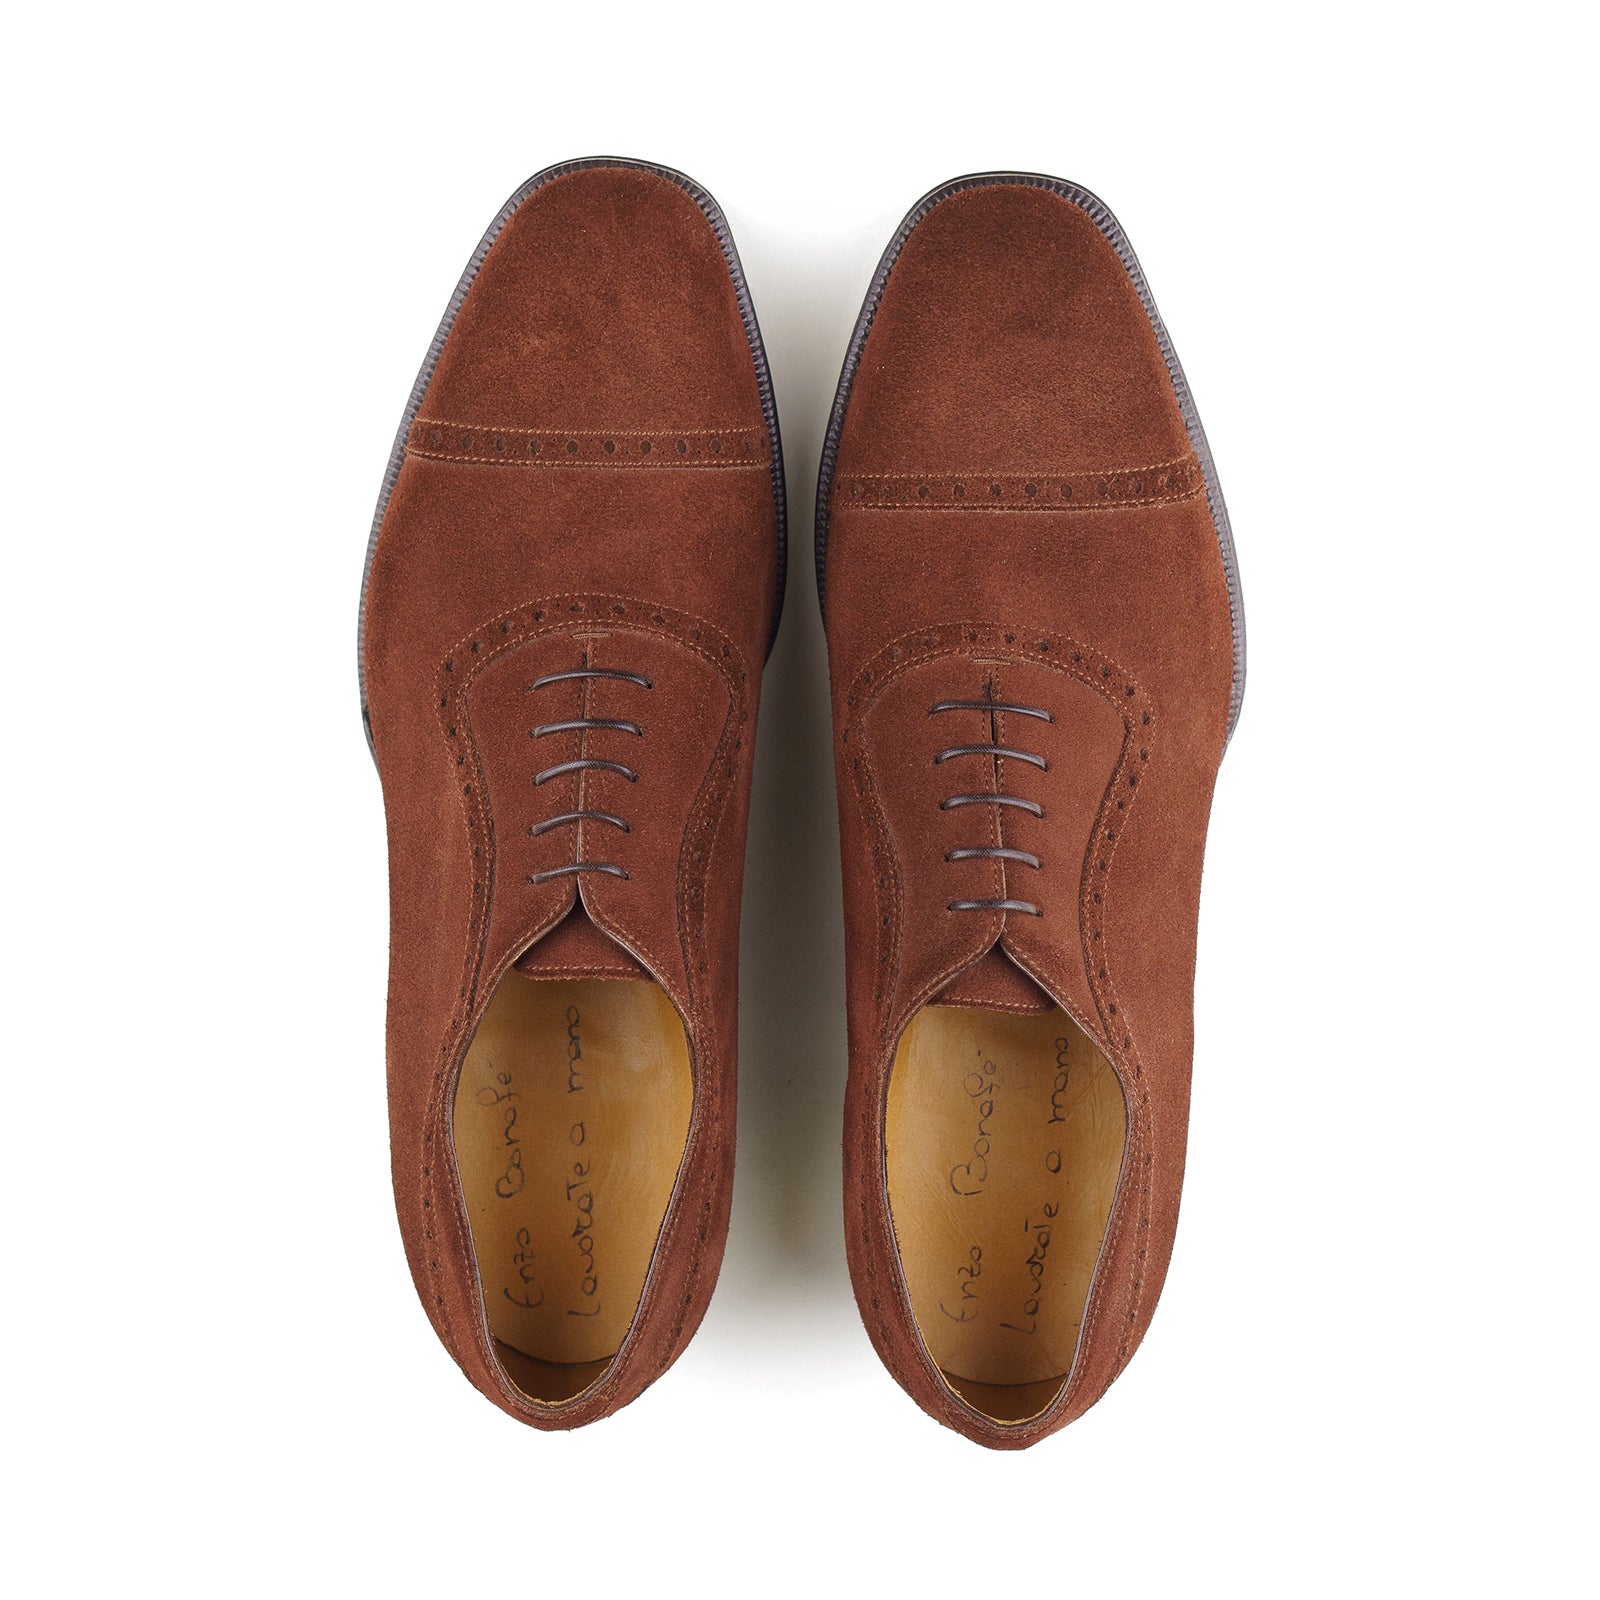 Style 3513 - Polo Brown Superbuck Suede